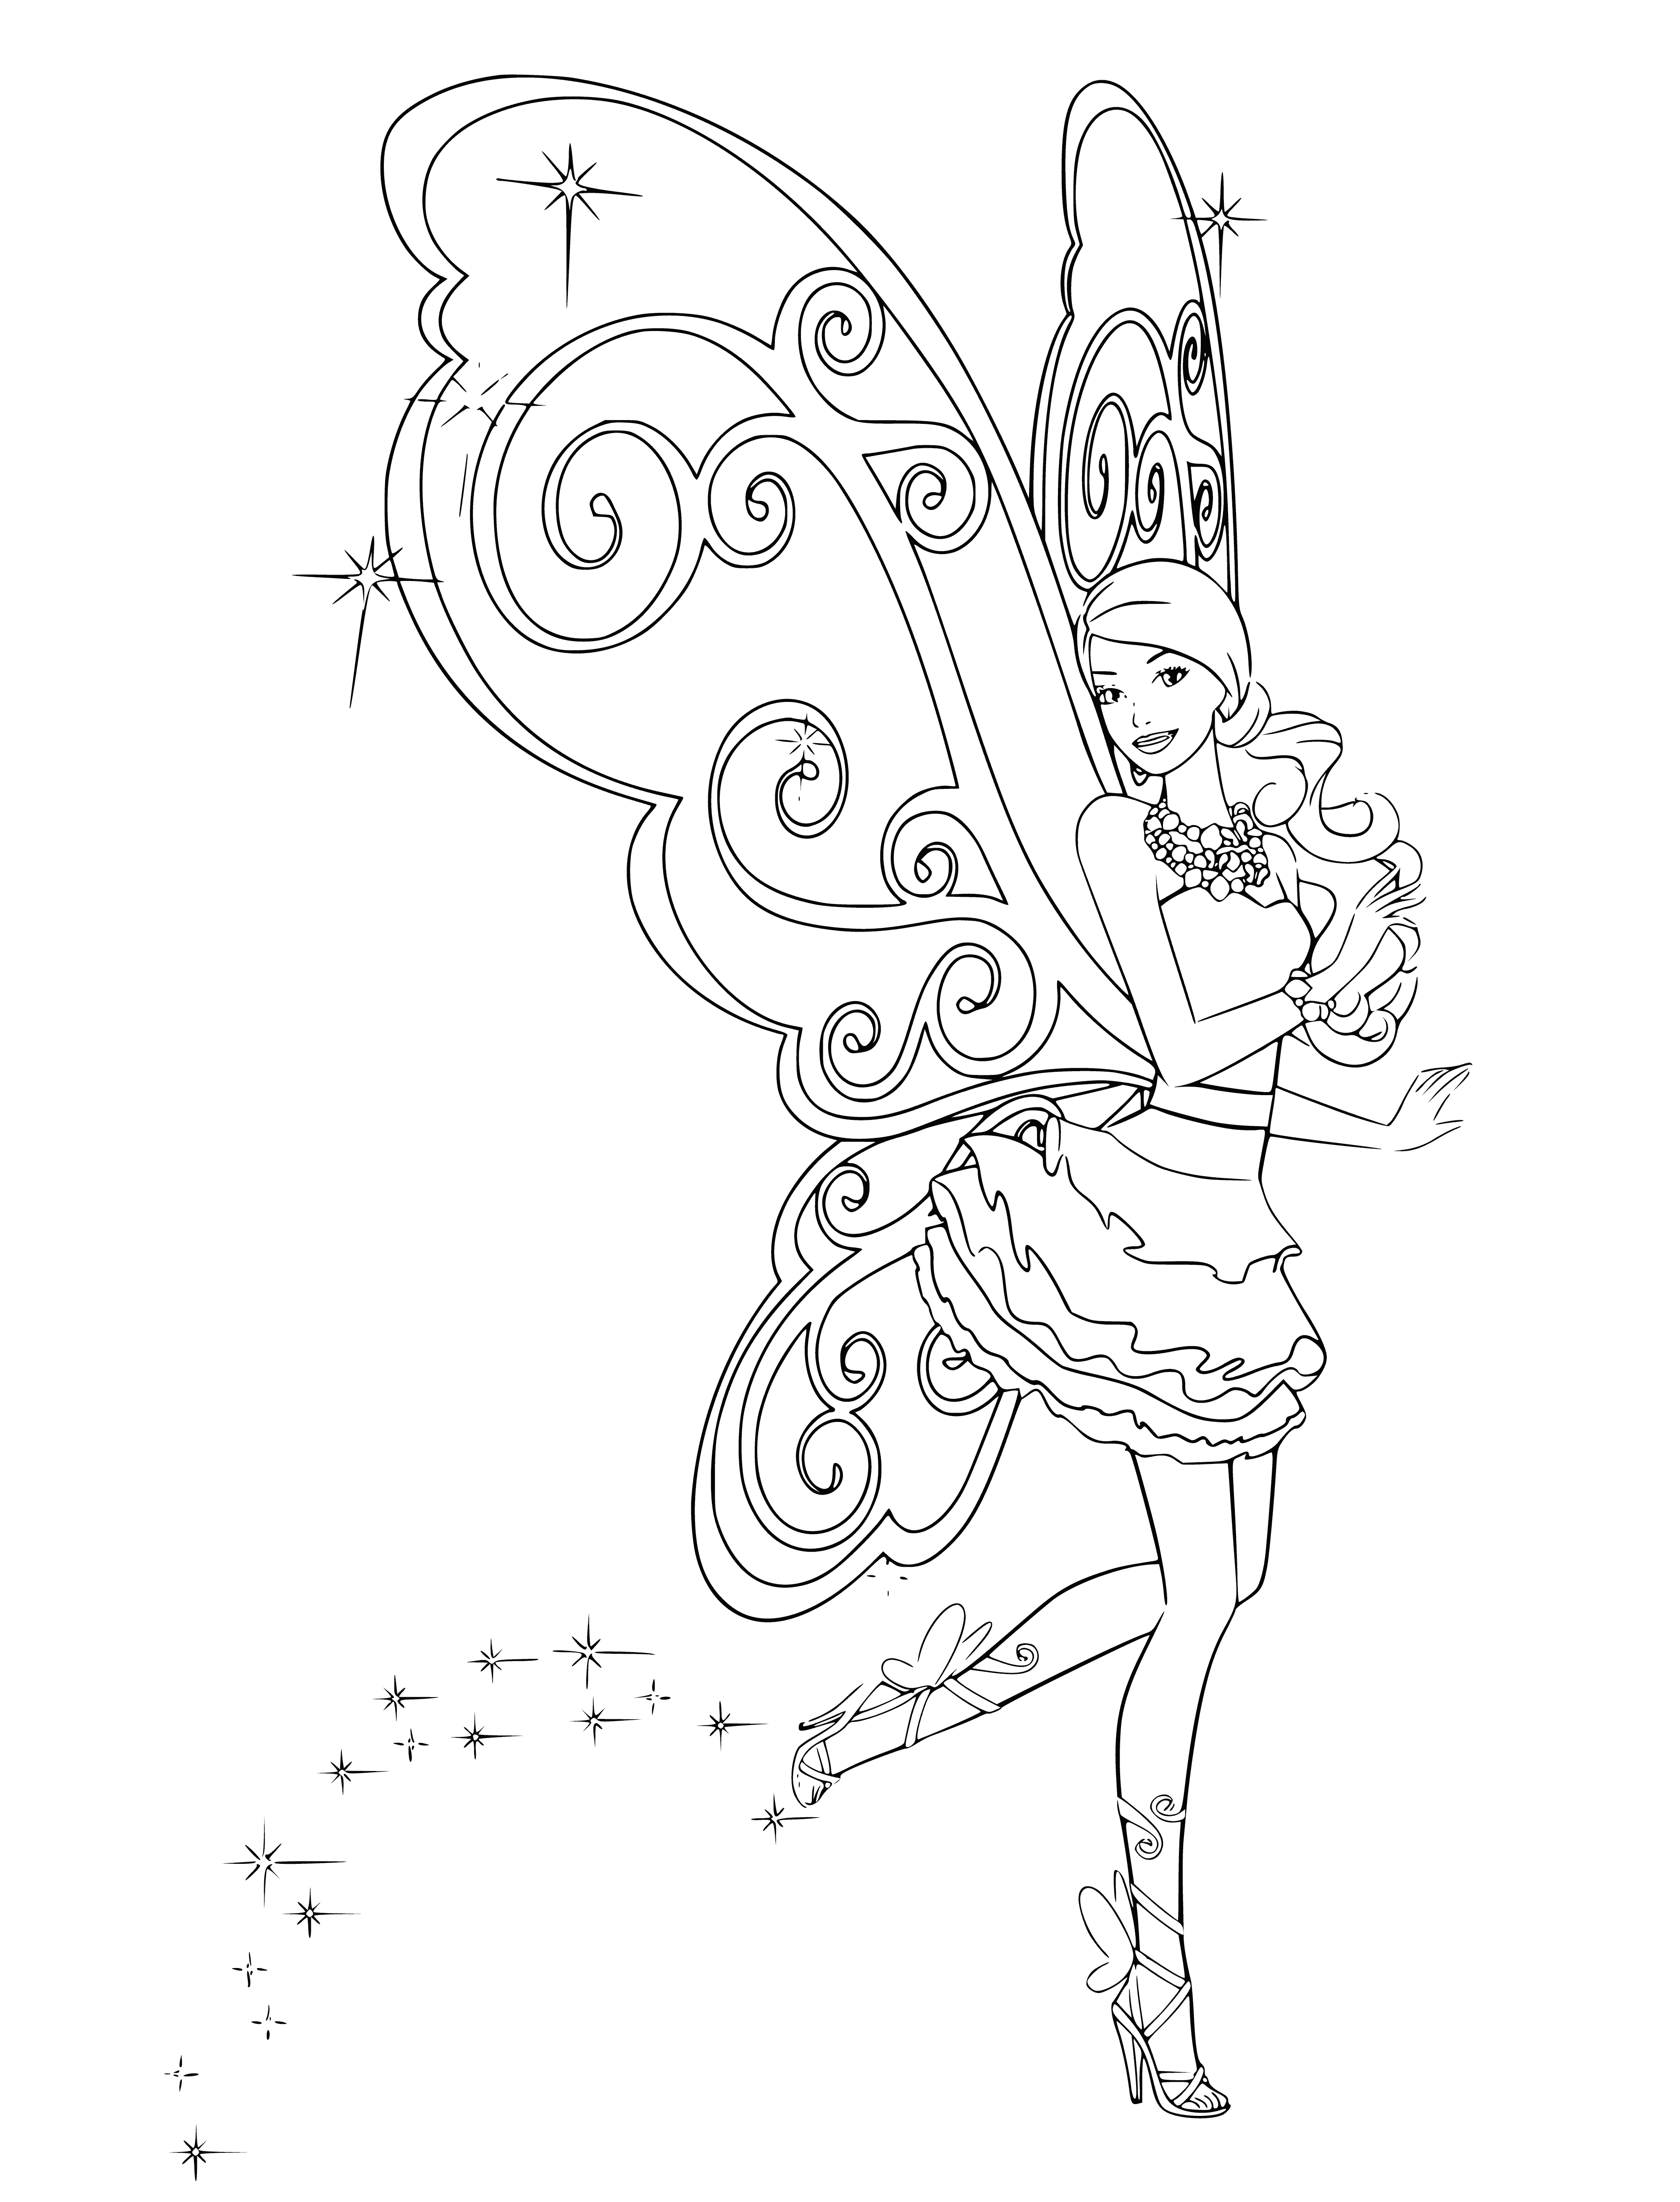 coloring page: Fairy Barbie has long blonde hair with a pink streak, wears a purple & pink dress w/ fairy wings, and holds a magic wand w/ star at top.